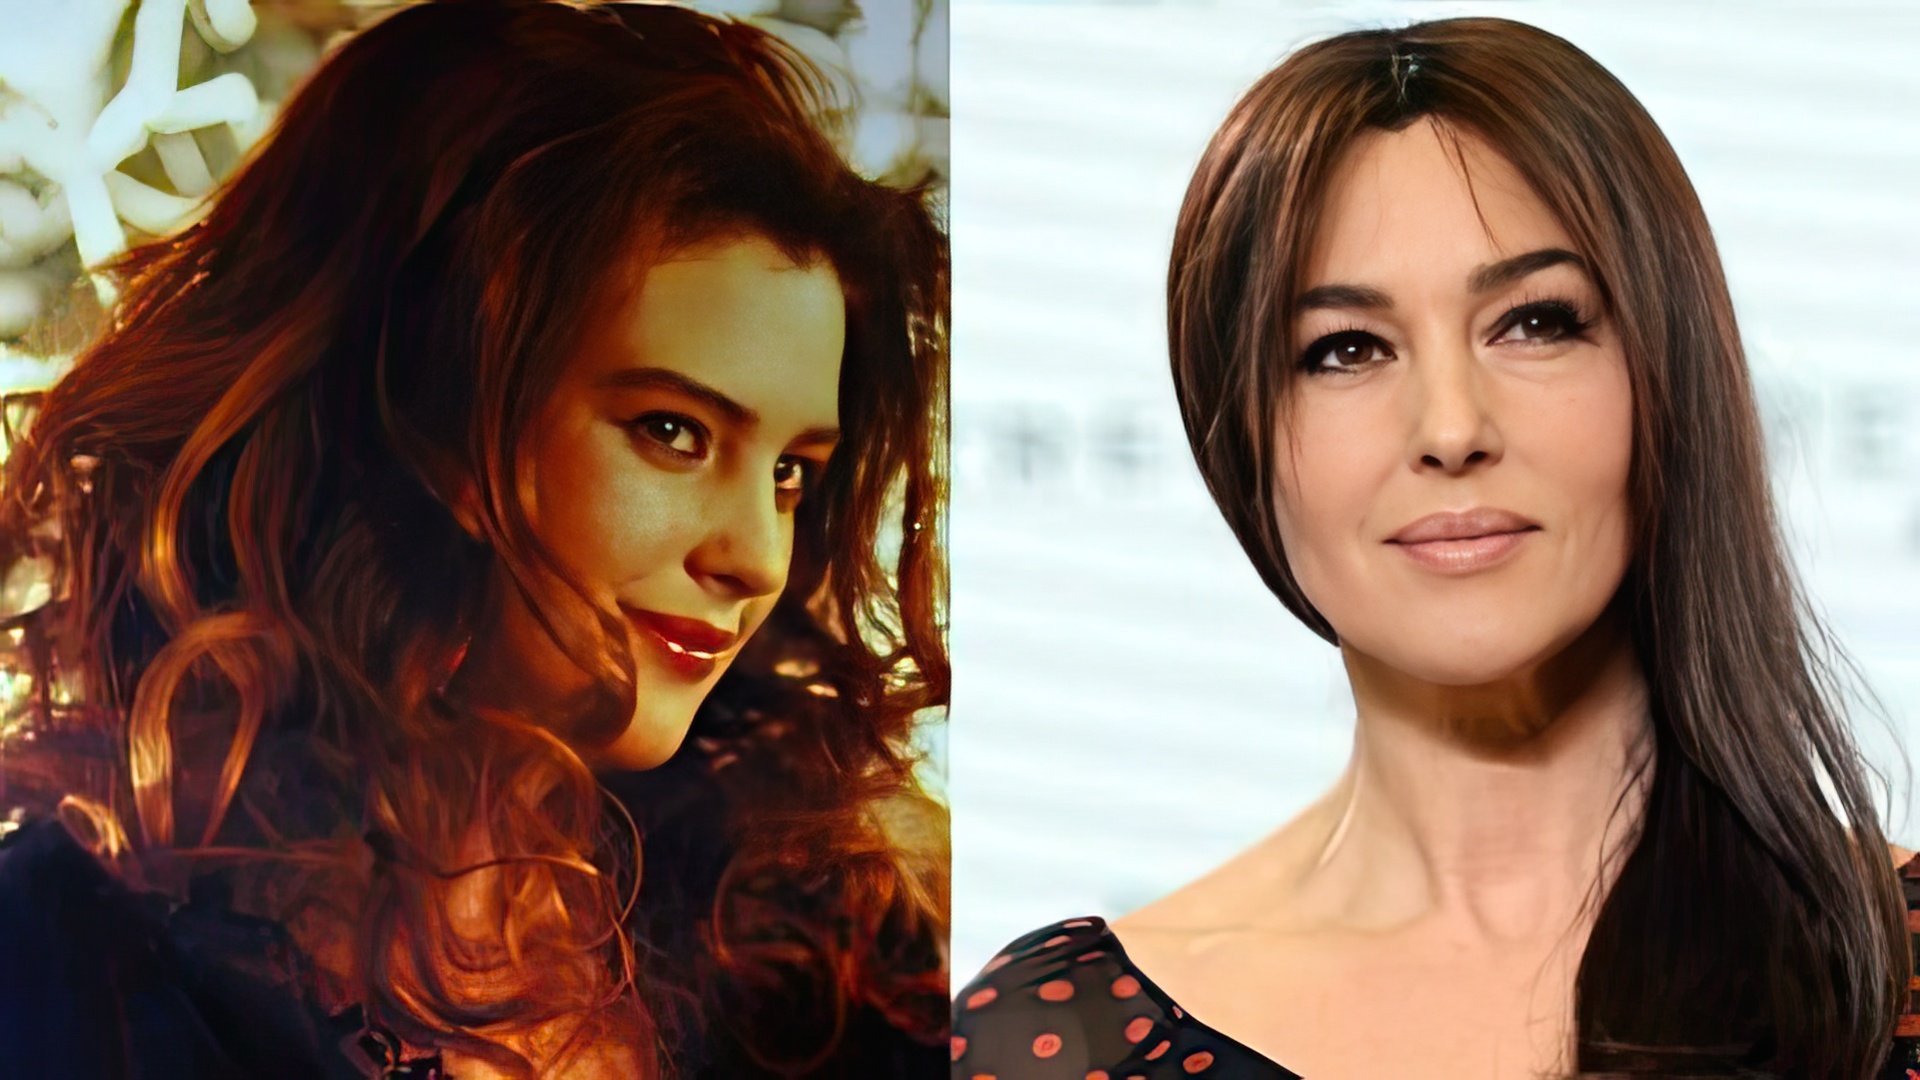 Monica Bellucci in her youth and now (18 and 50 years old)